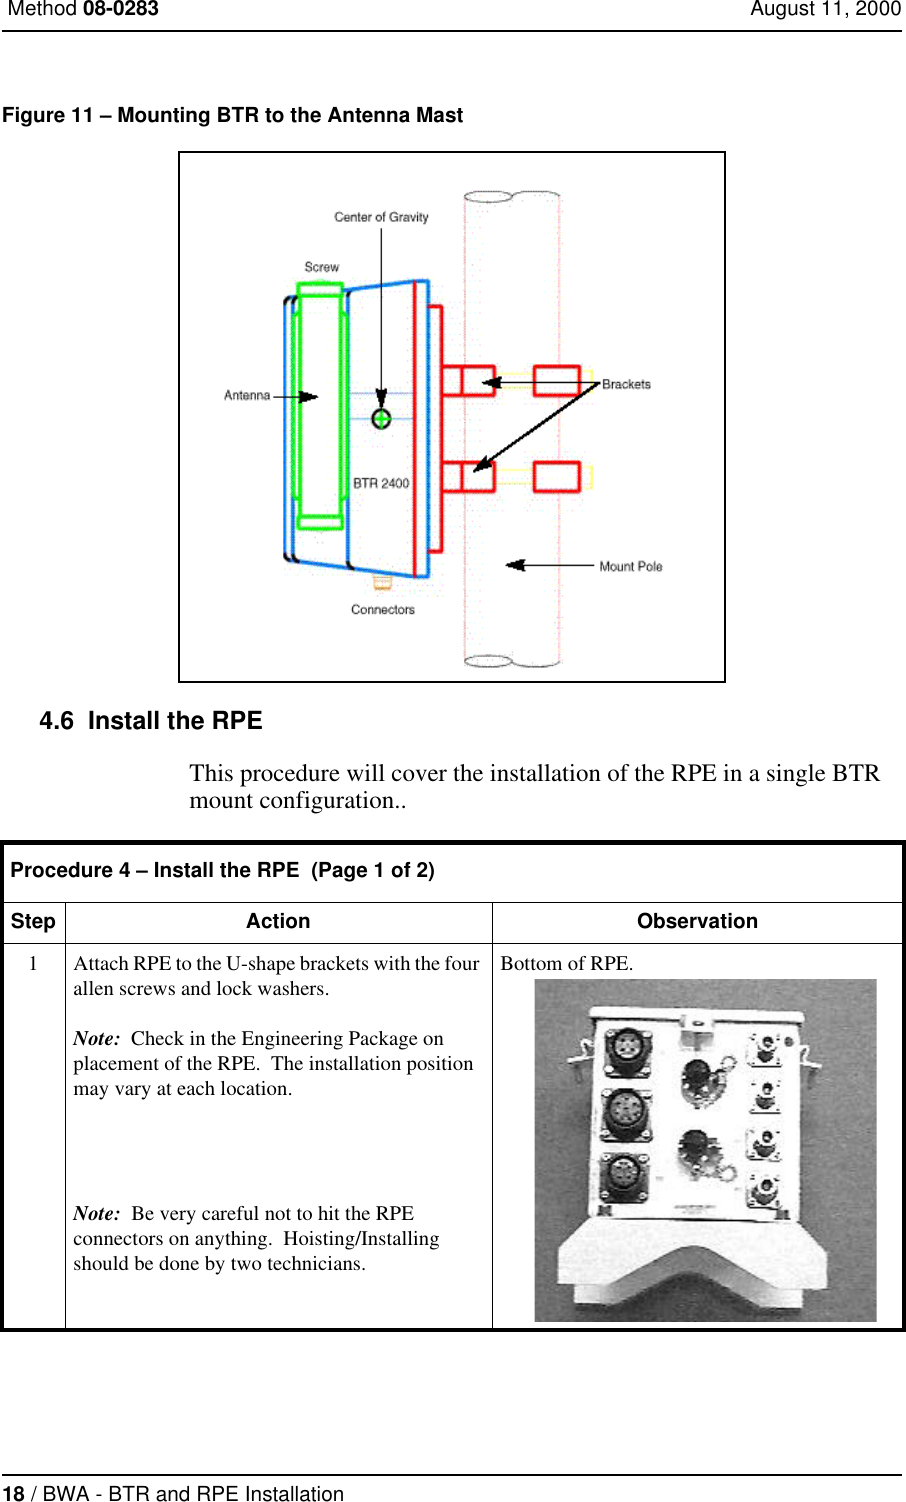 18 / BWA - BTR and RPE Installation Method 08-0283 August 11, 2000Figure 11 – Mounting BTR to the Antenna Mast 4.6  Install the RPEThis procedure will cover the installation of the RPE in a single BTR mount configuration.. Procedure 4 – Install the RPE  (Page 1 of 2)Step Action Observation1Attach RPE to the U-shape brackets with the four allen screws and lock washers. Note:  Check in the Engineering Package on placement of the RPE.  The installation position may vary at each location.Note:  Be very careful not to hit the RPE connectors on anything.  Hoisting/Installing should be done by two technicians.Bottom of RPE.